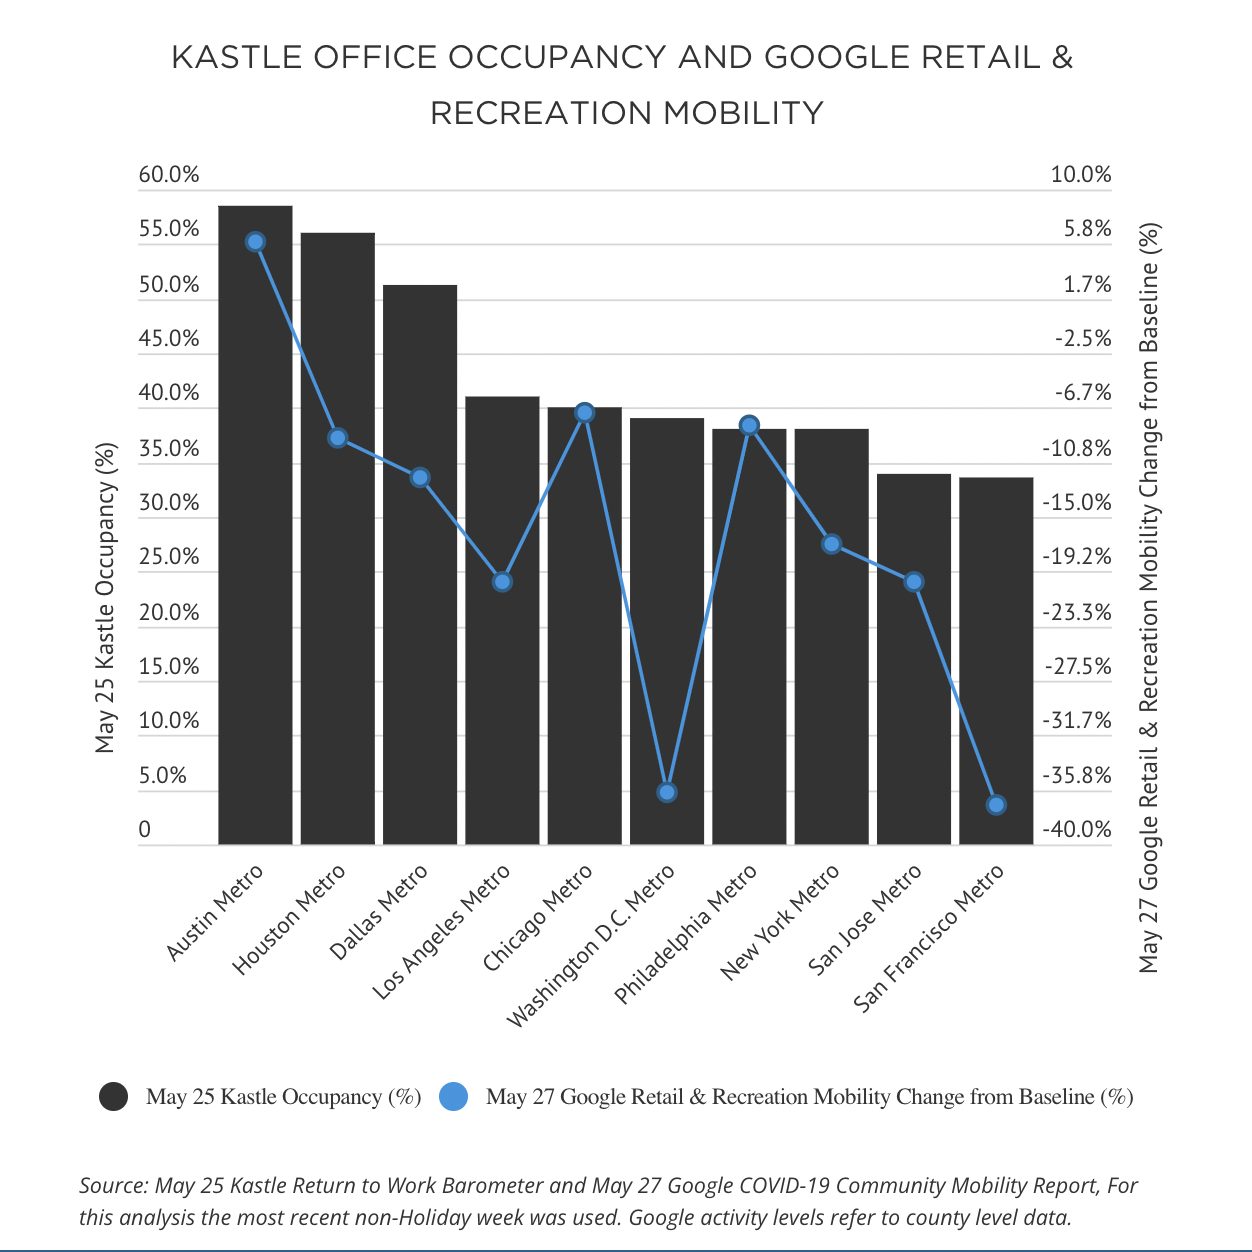 KASTLE OFFICE OCCUPANCY AND GOOGLE RETAIL & RECREATION MOBILITY